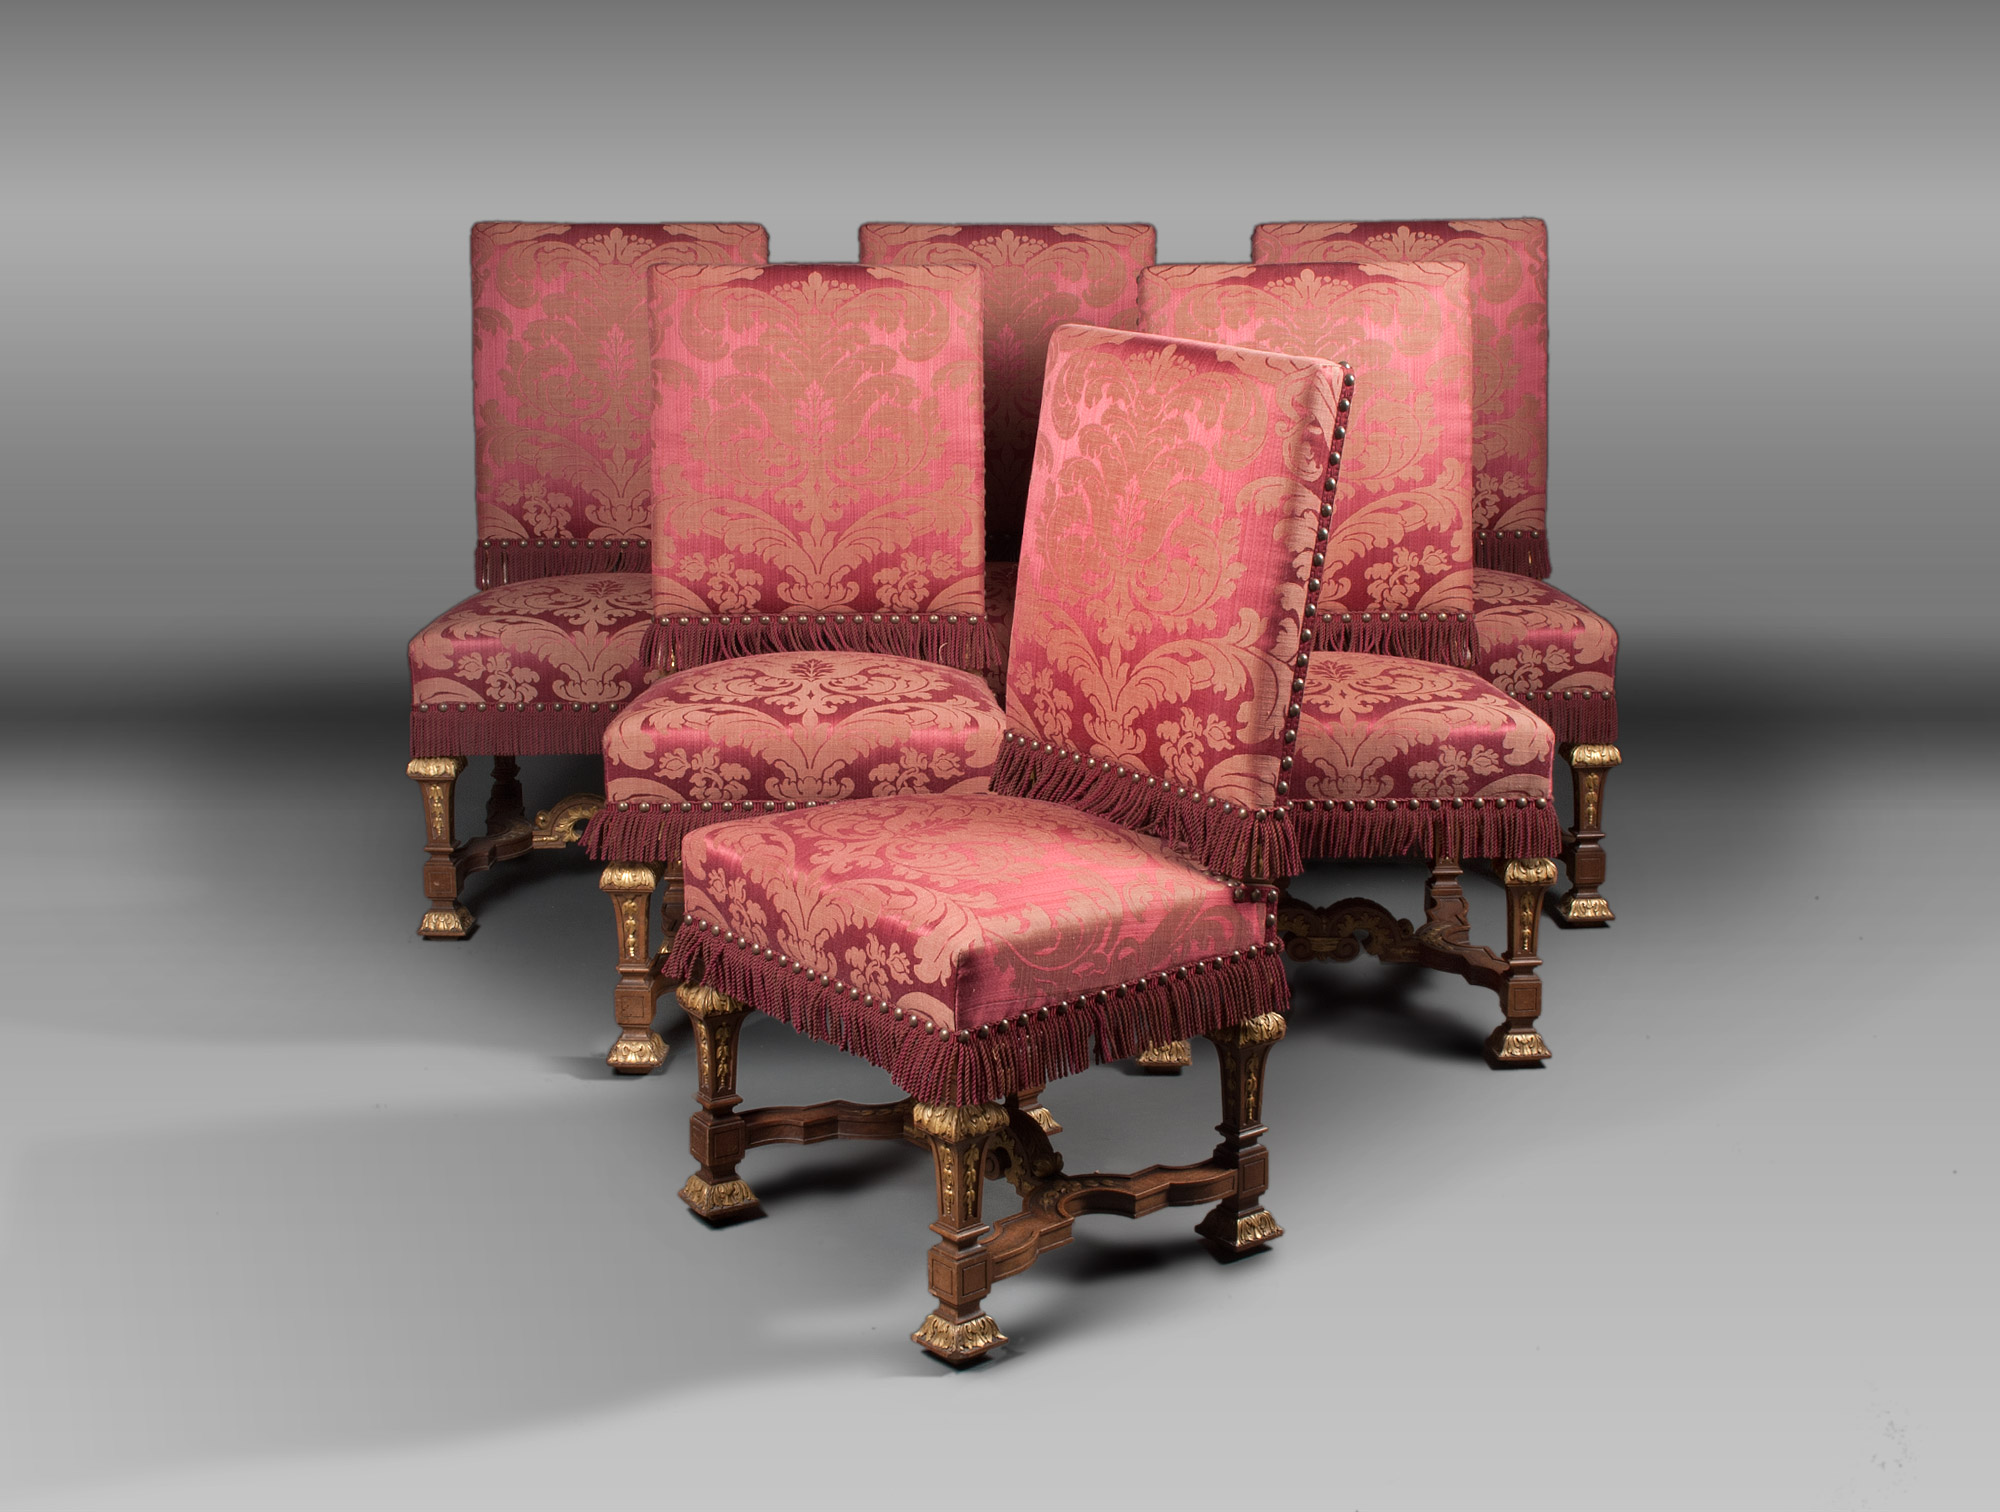 6 Louis XIV chairs Soubrier - Rent Seats Chair XVIIth